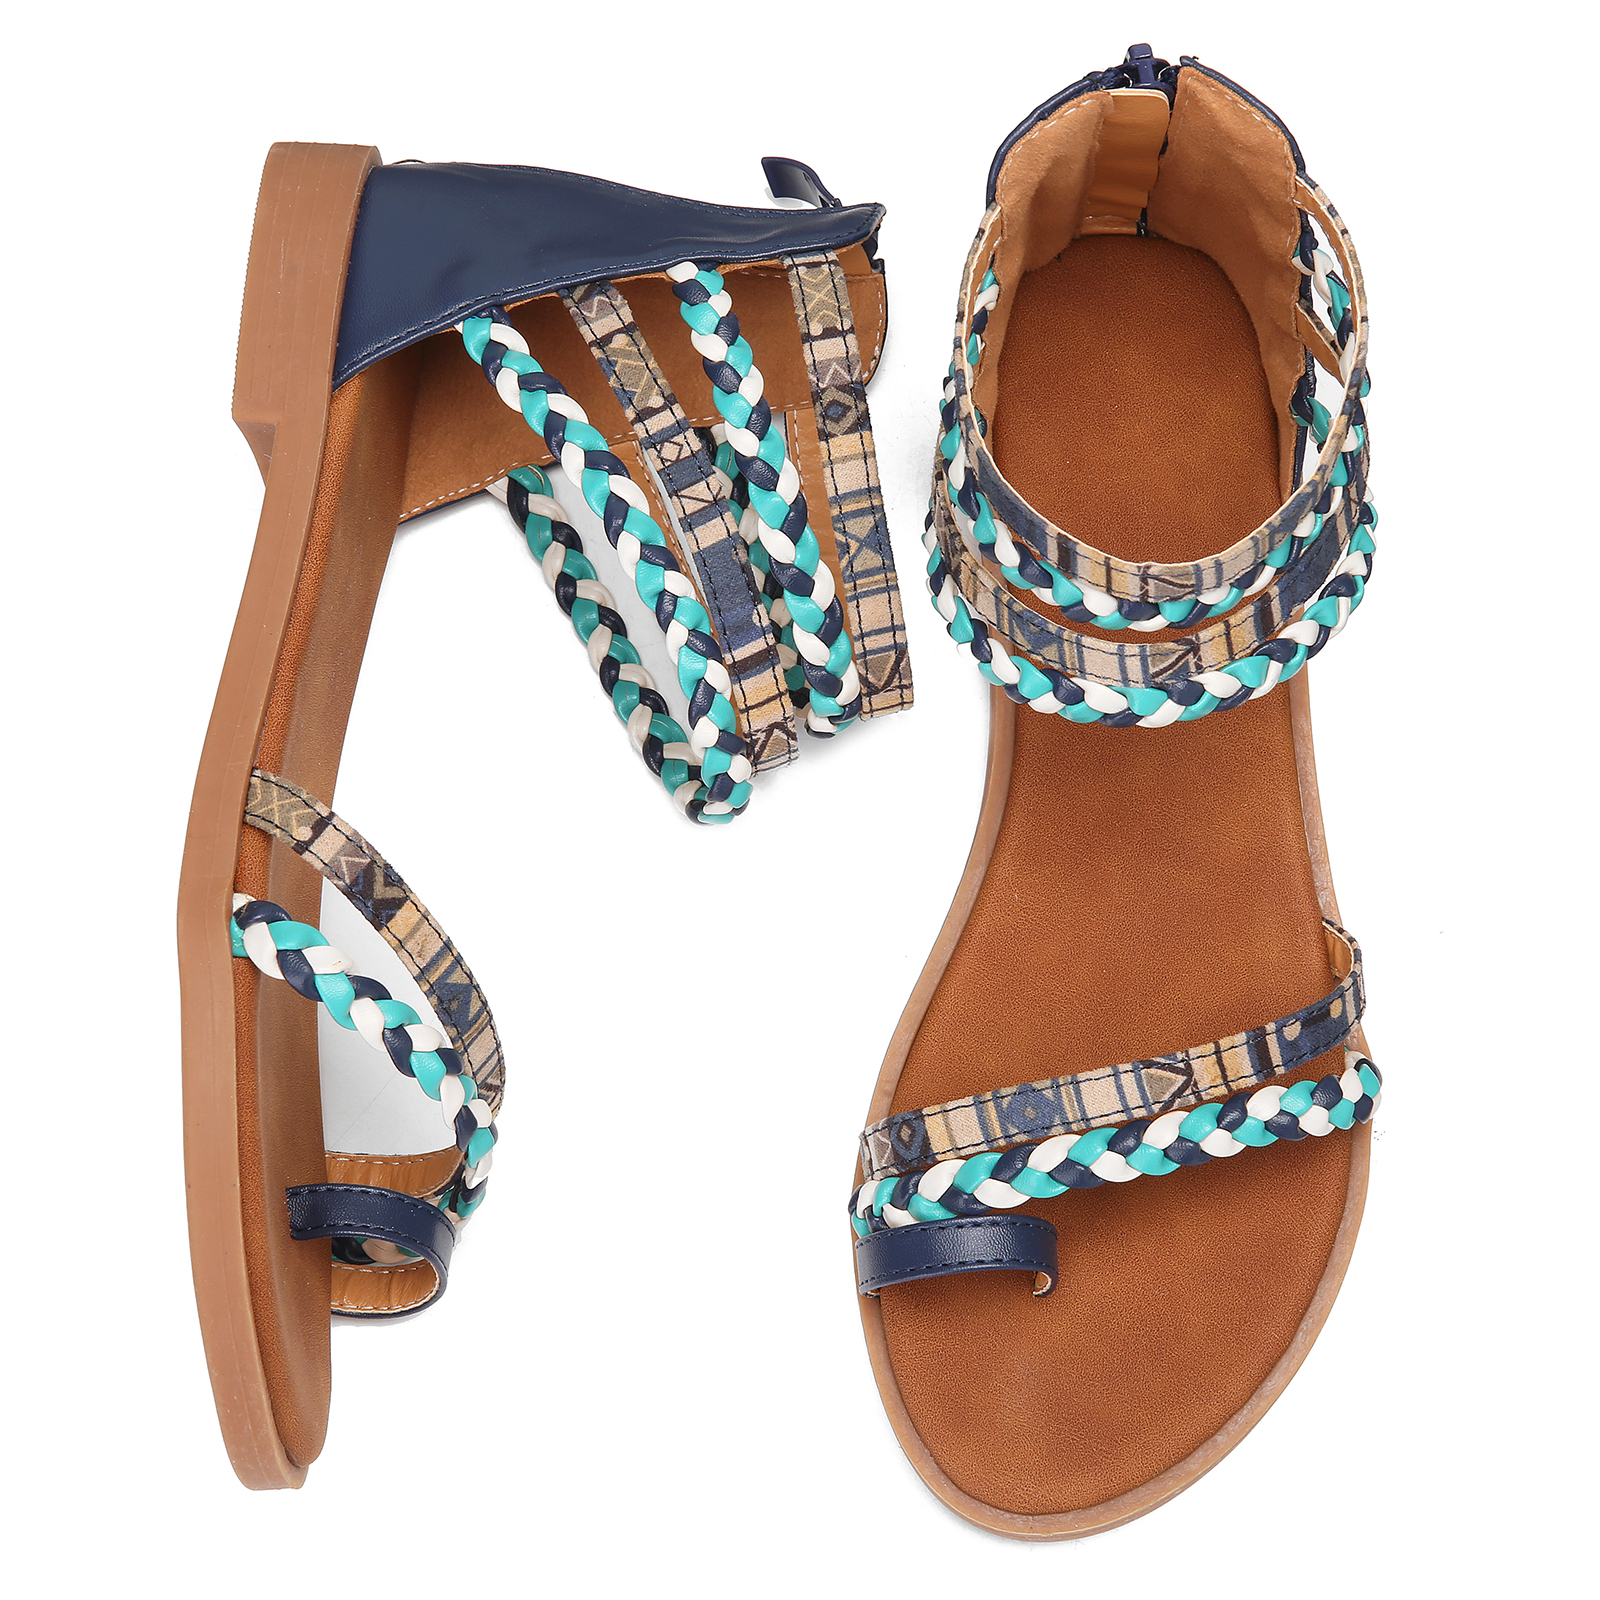 gracosy Summer Ethnic Style Gladiator Flat Sandals for Women